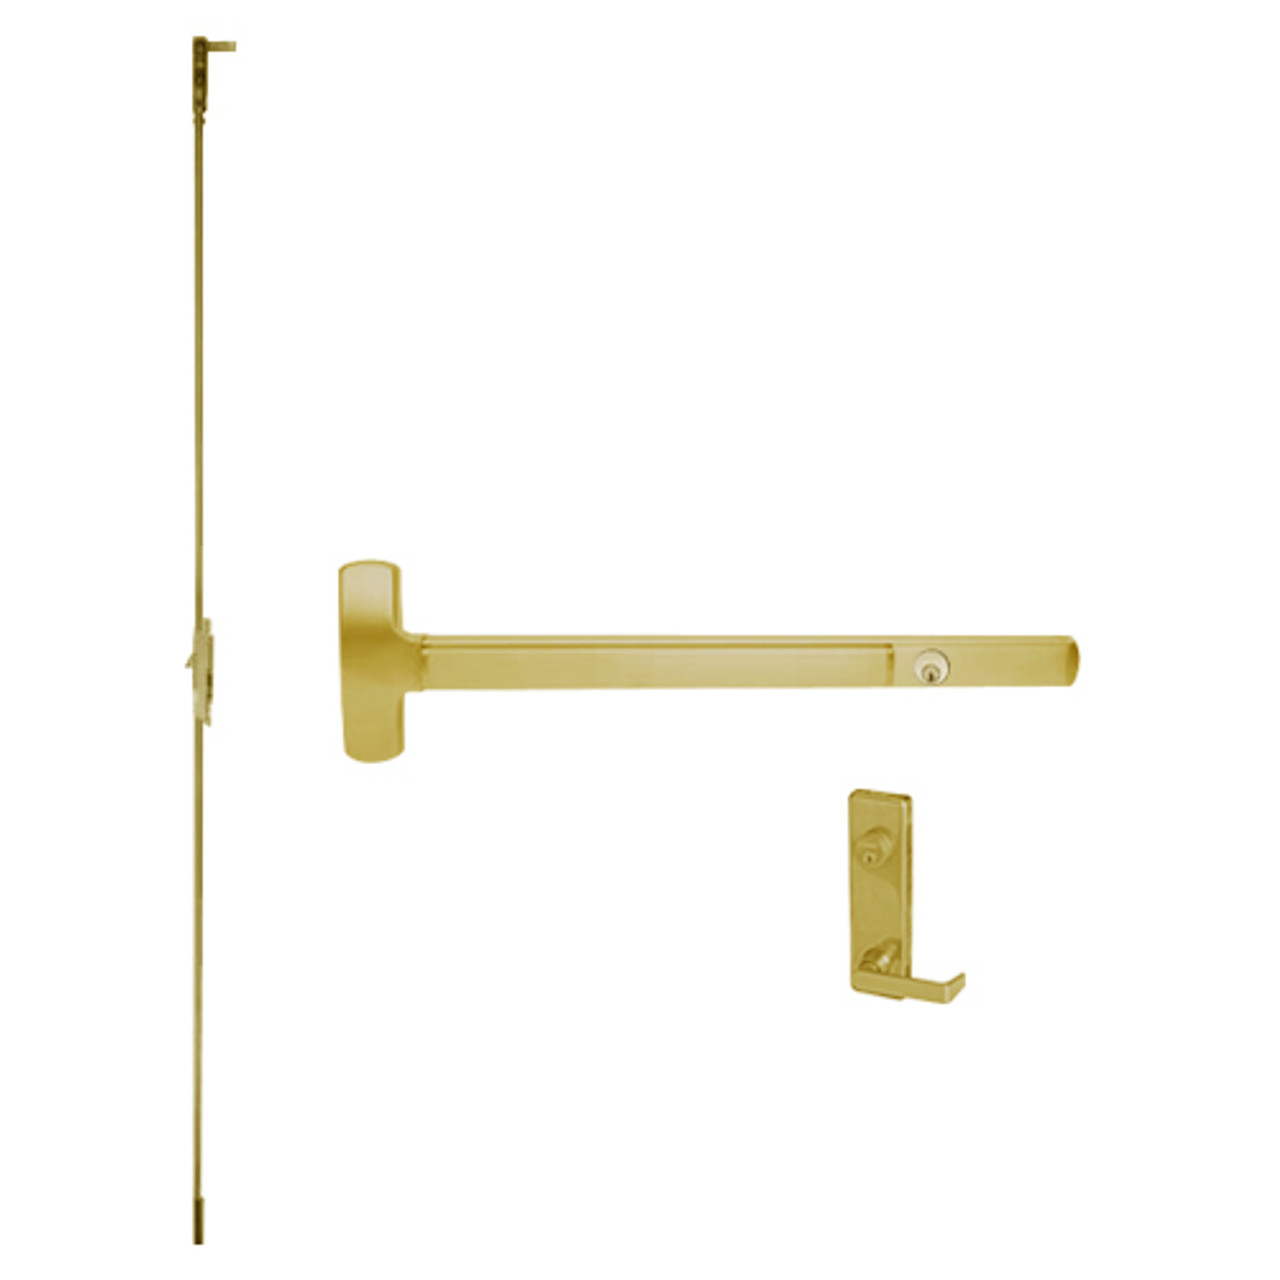 CD25-C-L-NL-DANE-US3-3-LHR Falcon Exit Device in Polished Brass